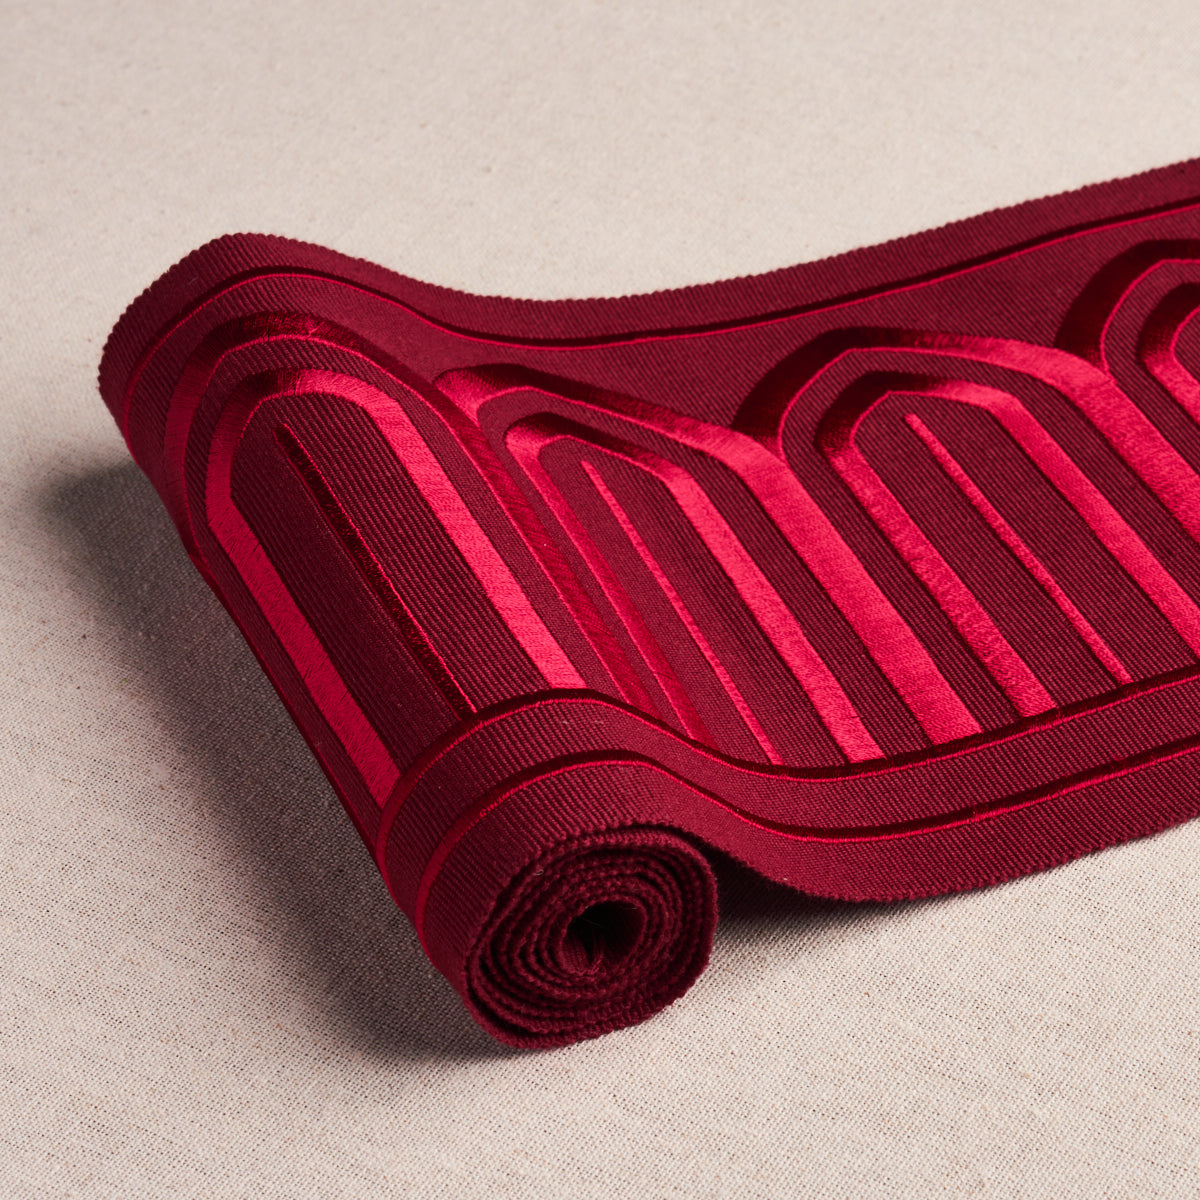 ARCHES EMBROIDERED TAPE WIDE | RED